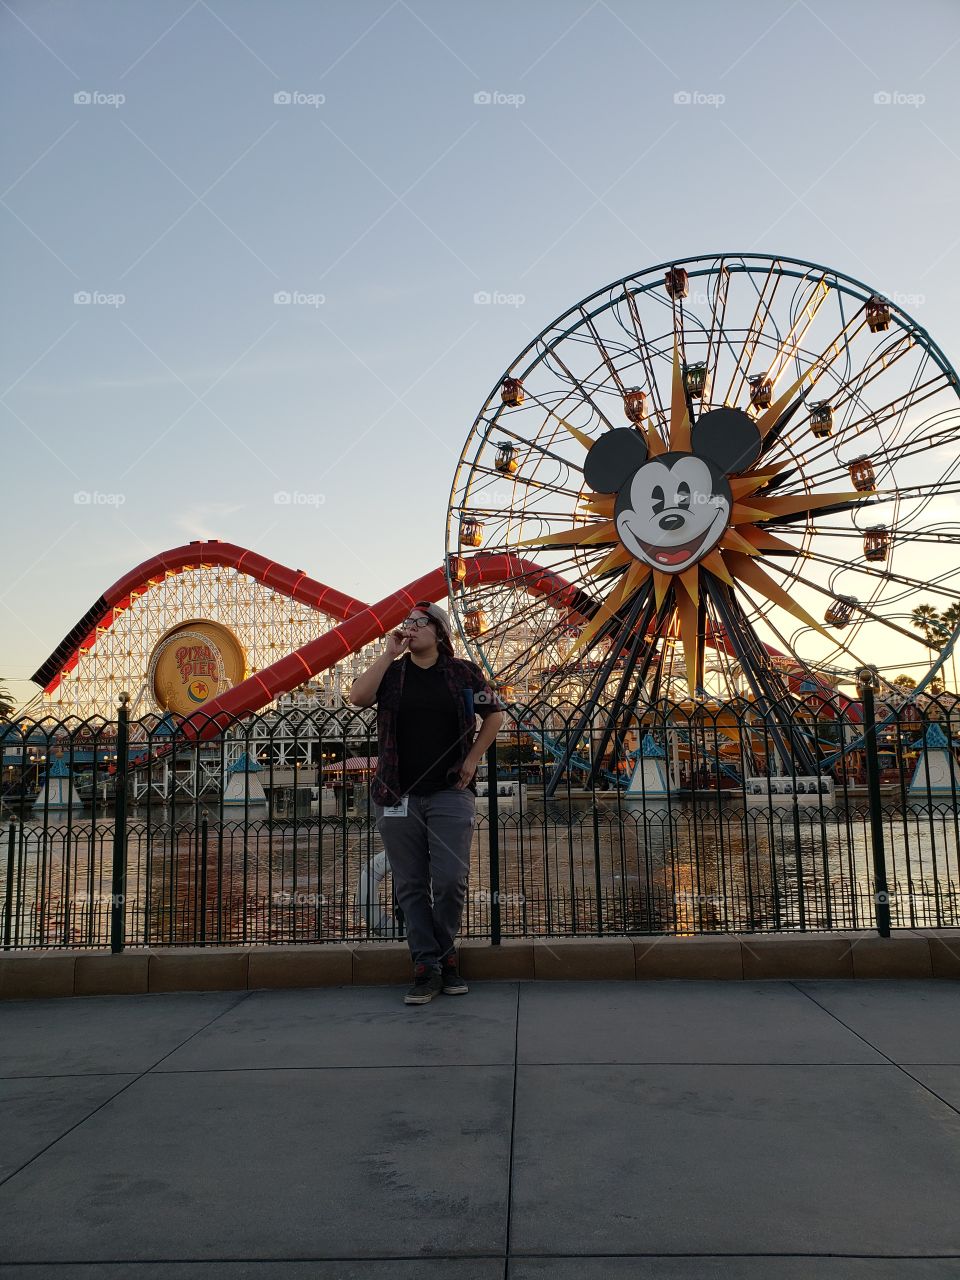 The sunset illumimates my girfiend having a smoke in front of Disneyland's Paradise Pier.